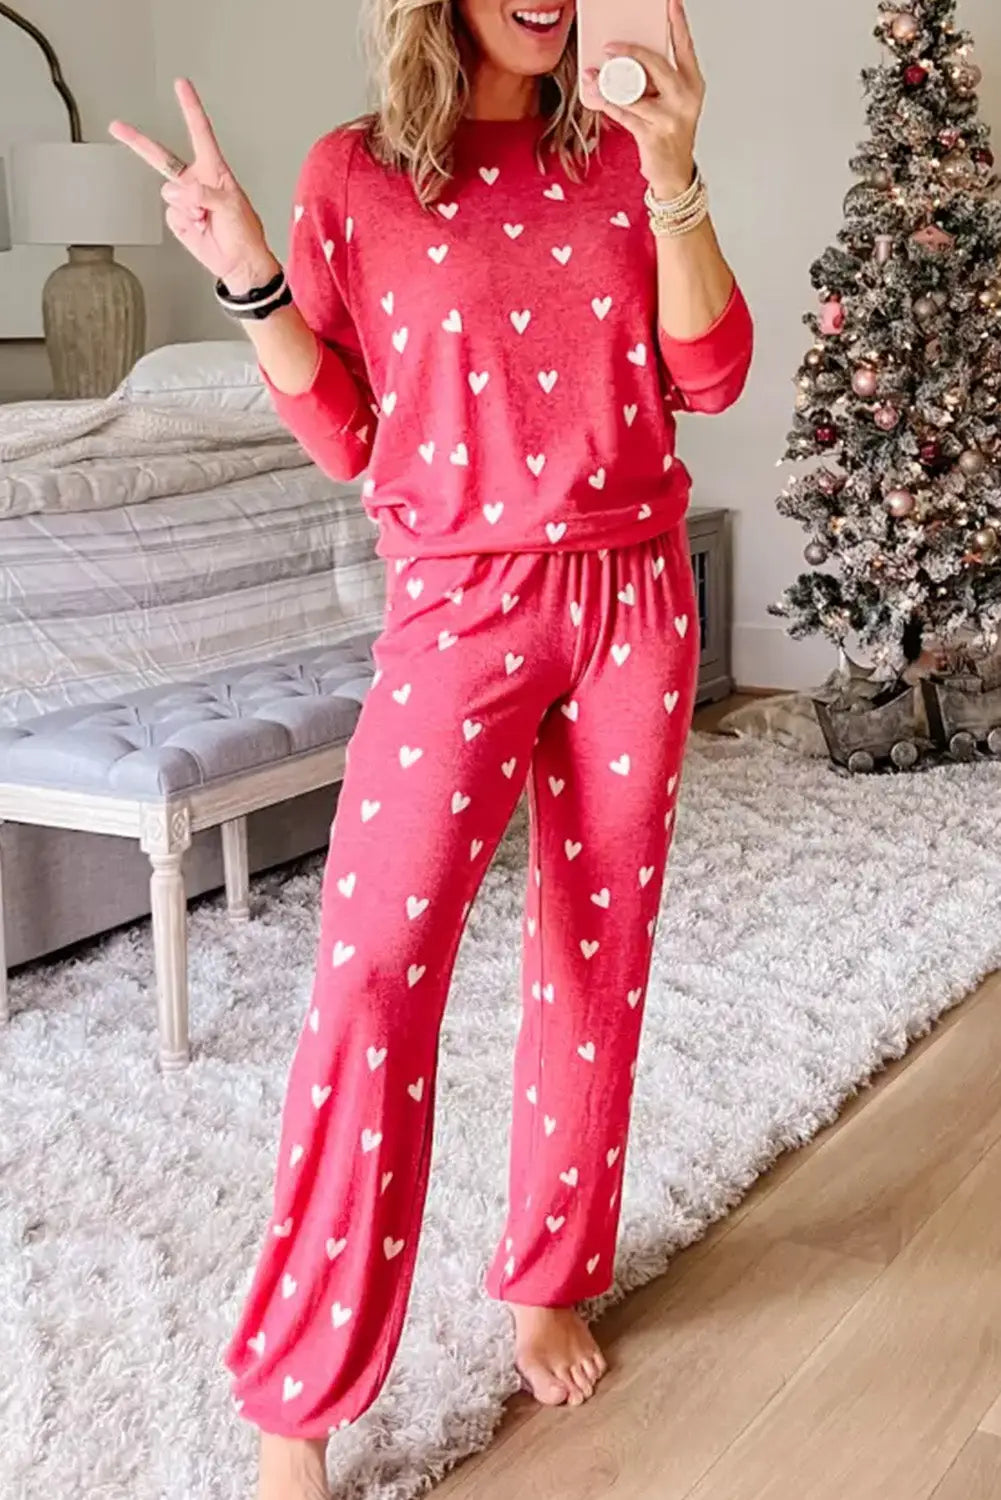 Fiery red valentines heart print pants set - l / 95% polyester + 5% elastane - sets